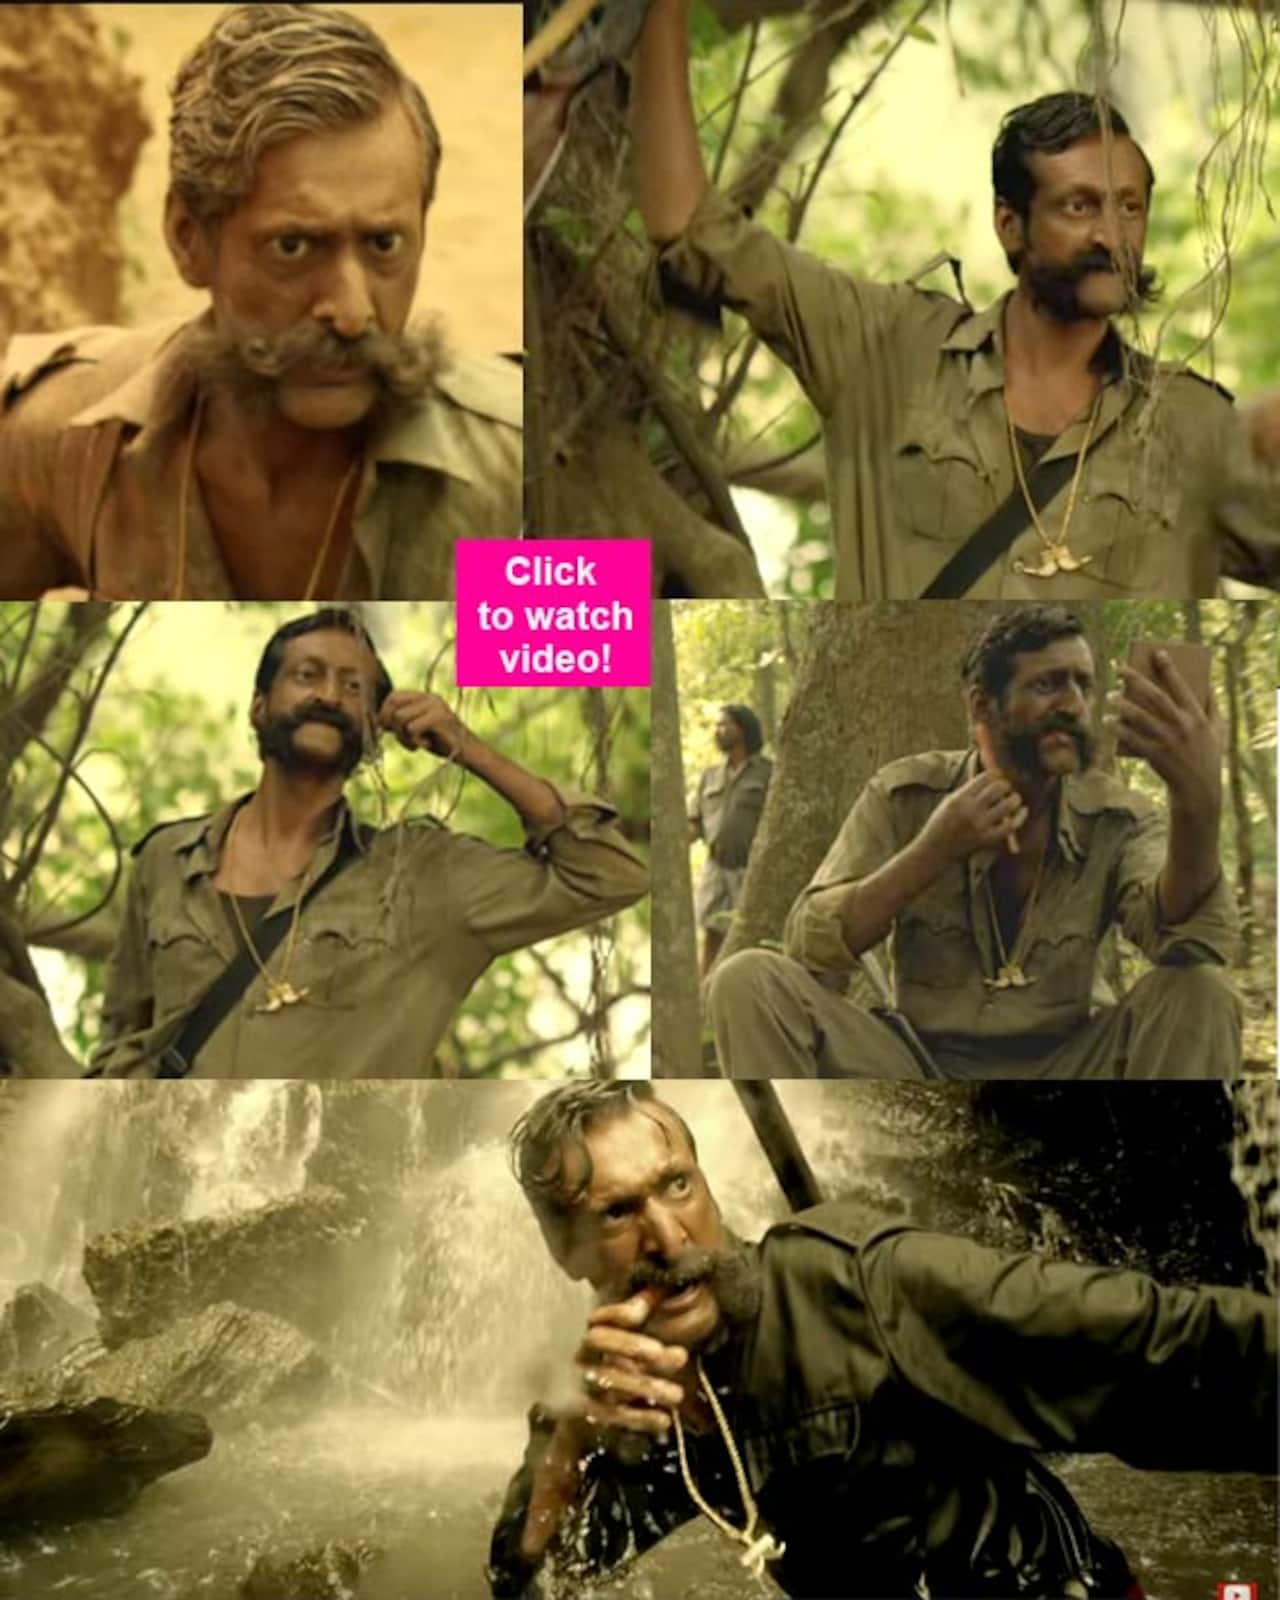 Veerappan trailer: Ram Gopal Varma's dark, twisted biopic promises A LOT of GORY content - watch video!